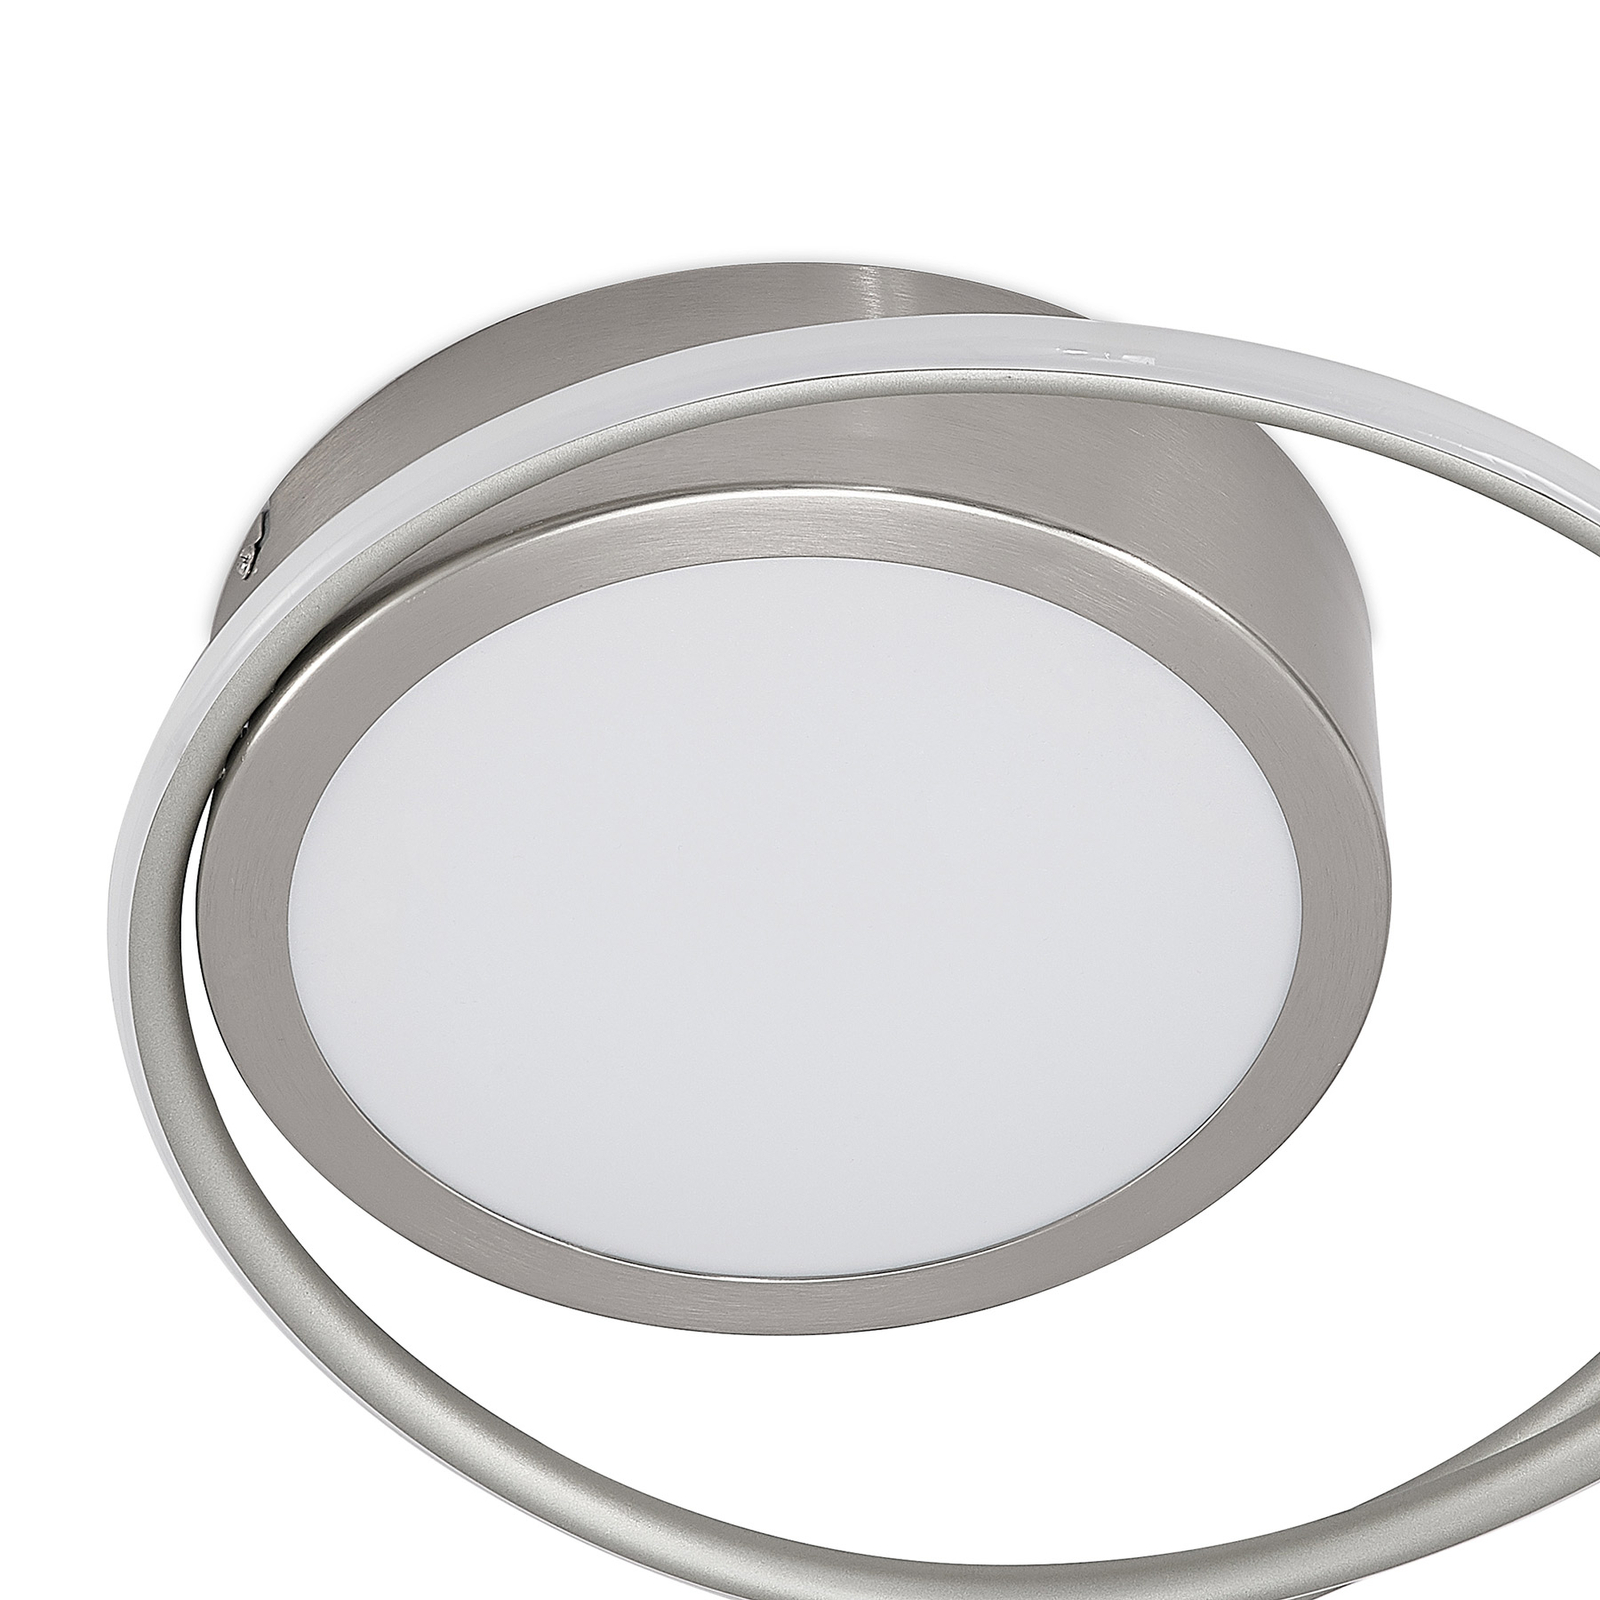 Lindby Bovia LED ceiling lamp, CCT dimmable nickel